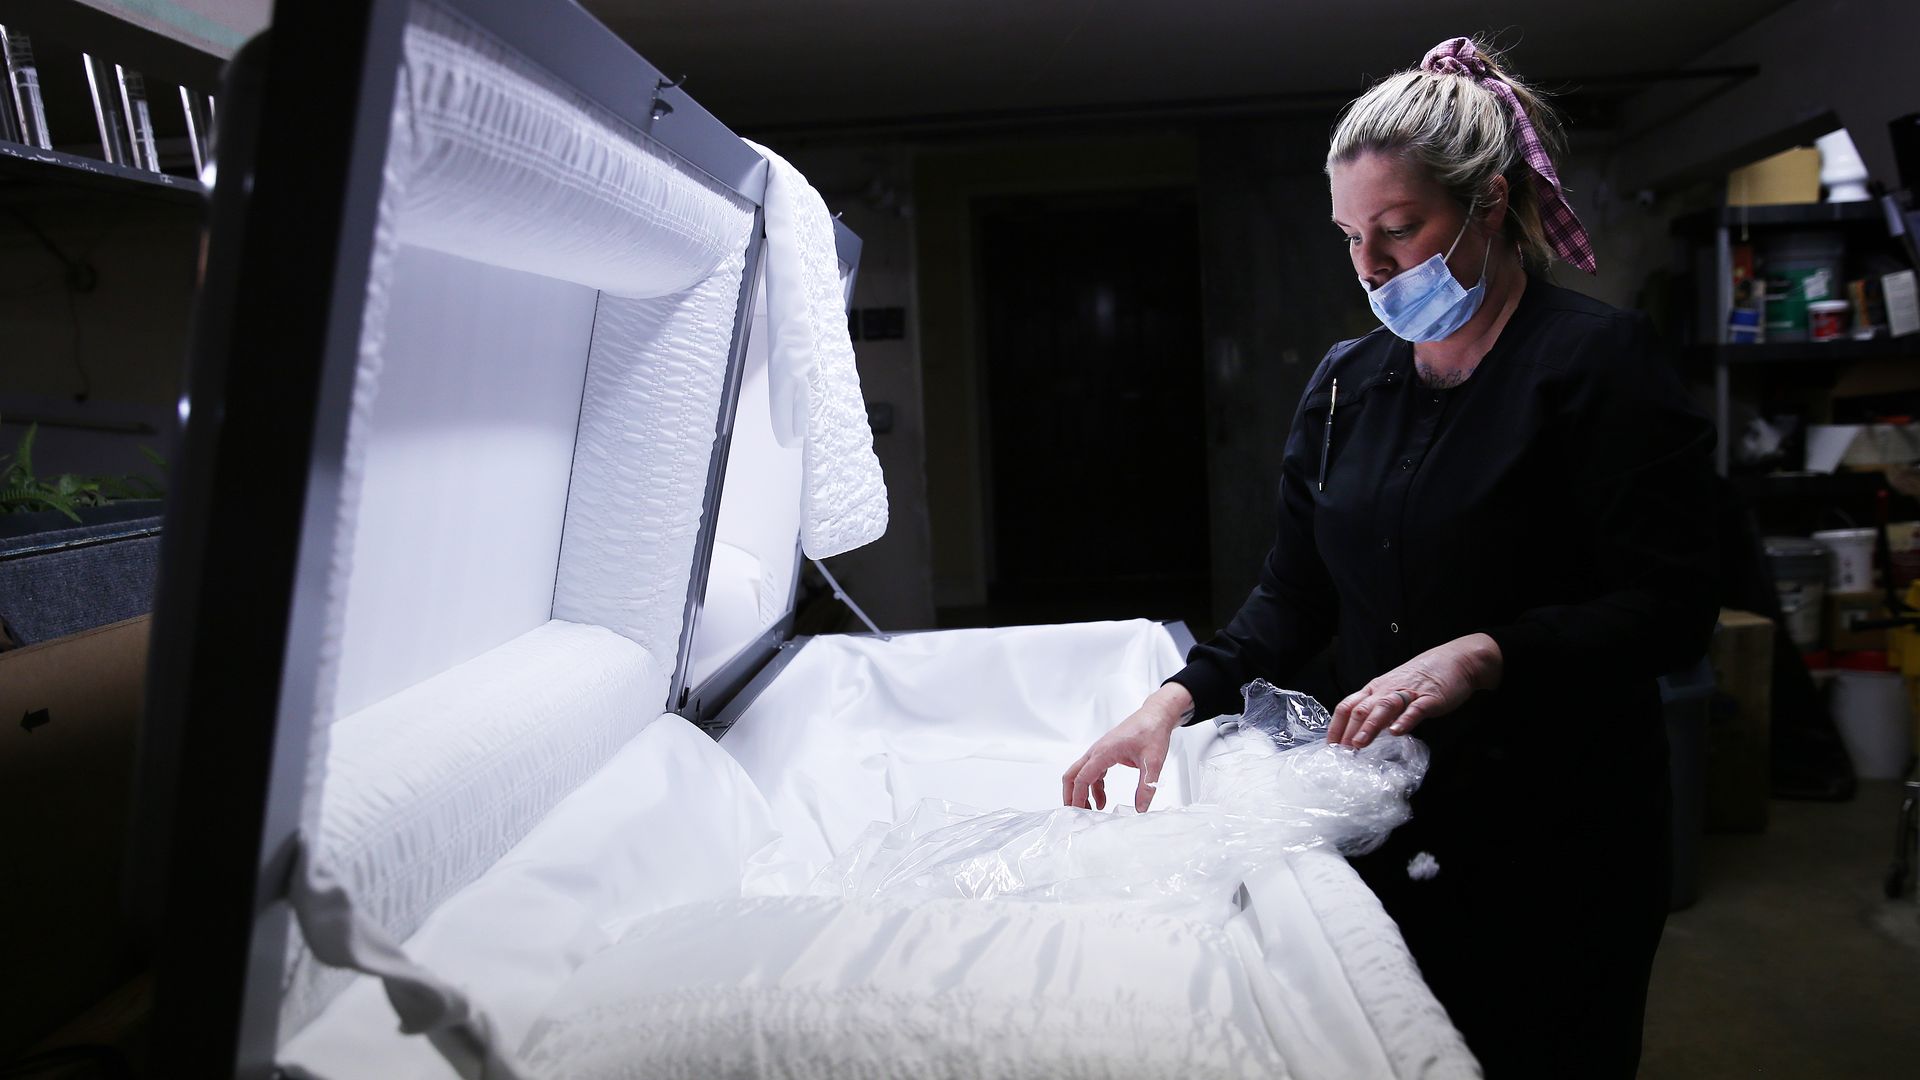 Embalmer and funeral director Kristy Oliver unwraps a new casket which will be used for a person who died after contracting COVID-19 at East County Mortuary on January 15